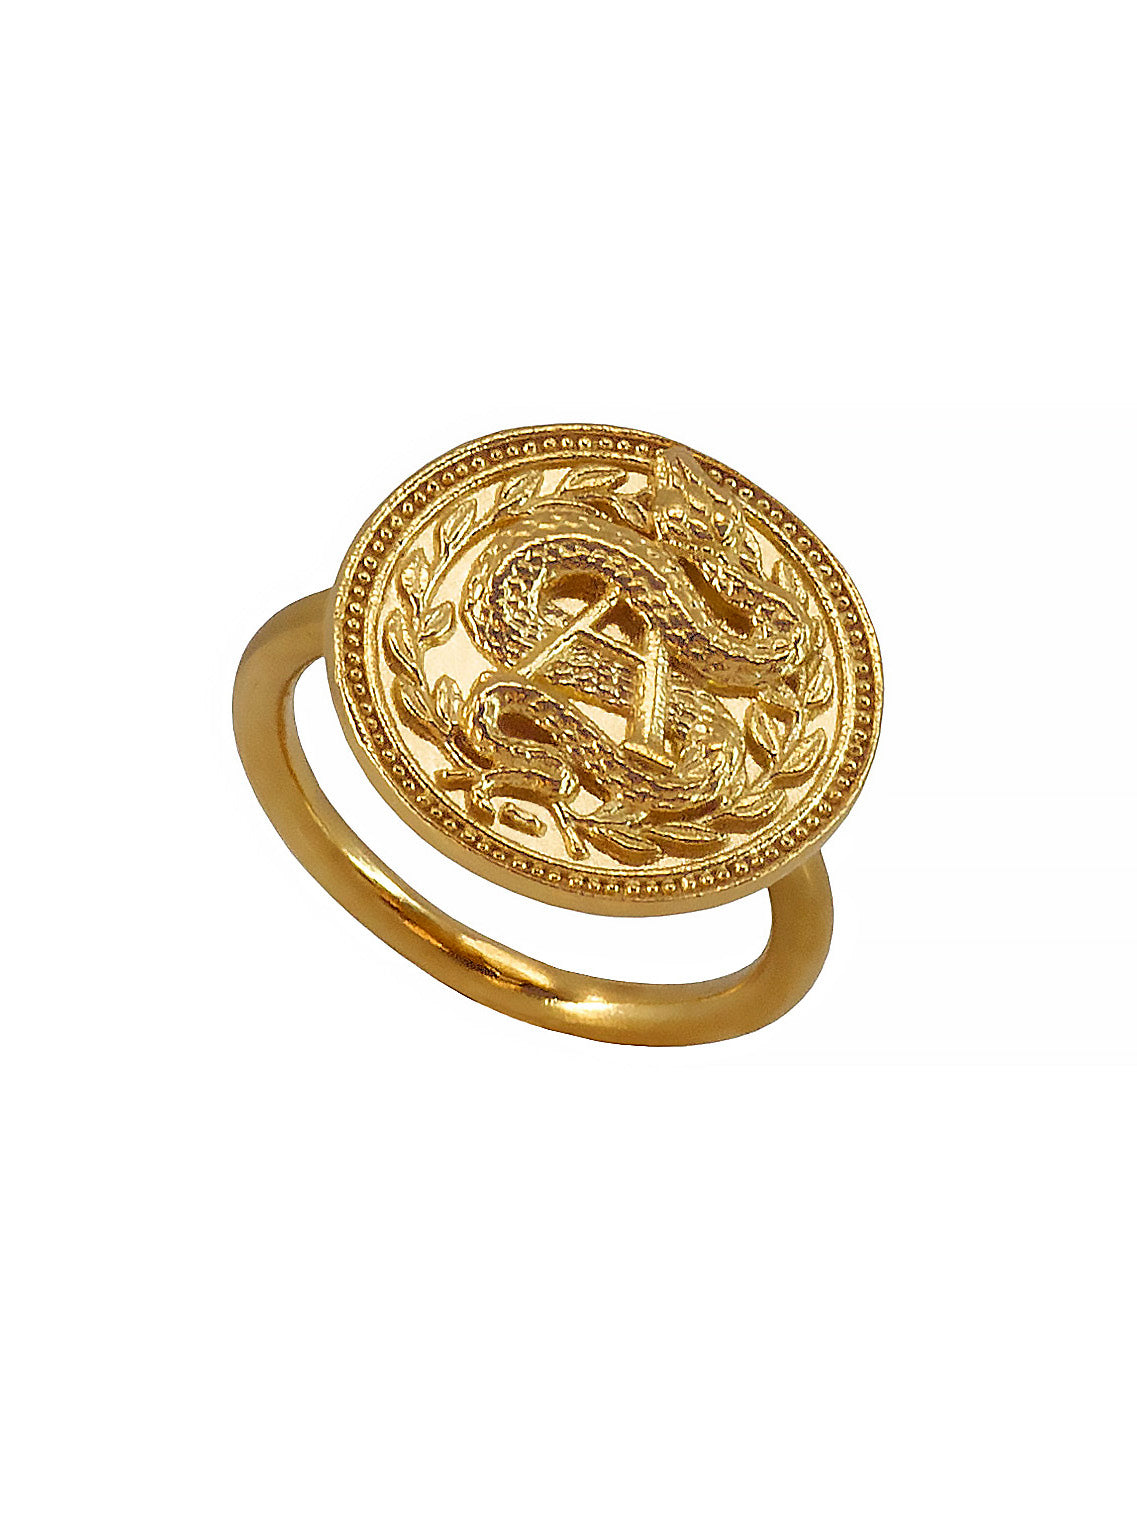 Blood type A Negative Ring. 23ct Gold plated Sterling Silver.Grupo sanguineo Anillo, Dorado